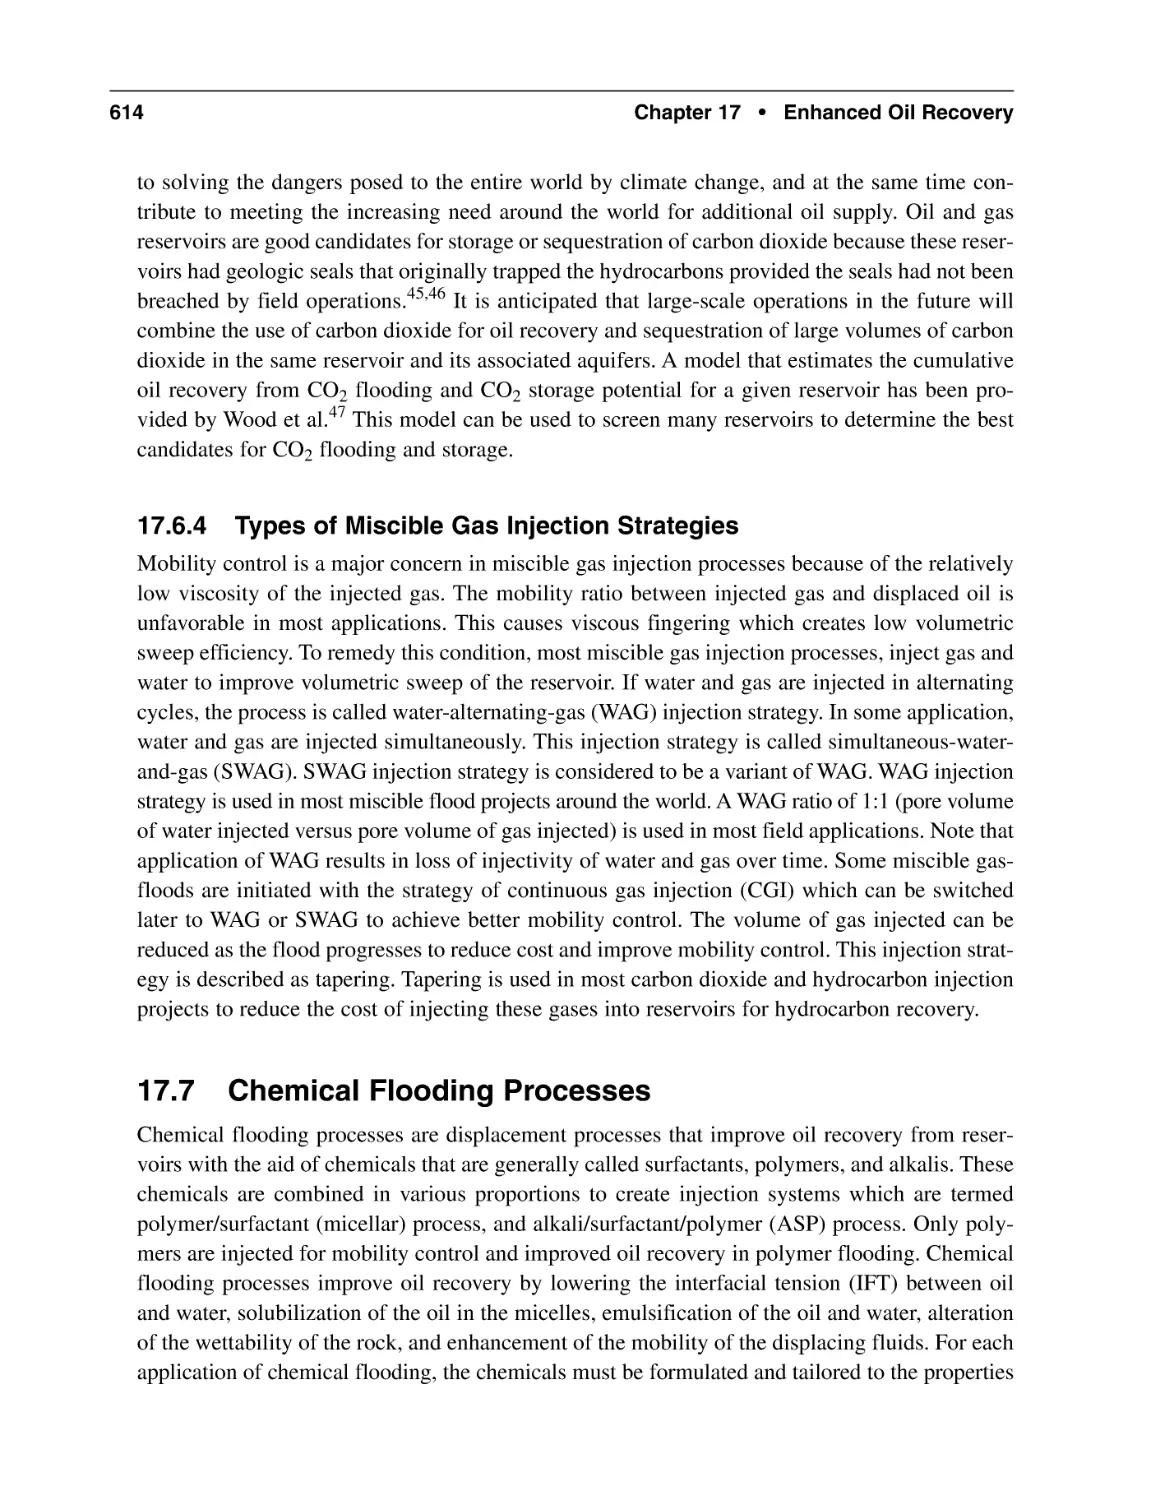 17.6.4 Types of Miscible Gas Injection Strategies
17.7 Chemical Flooding Processes